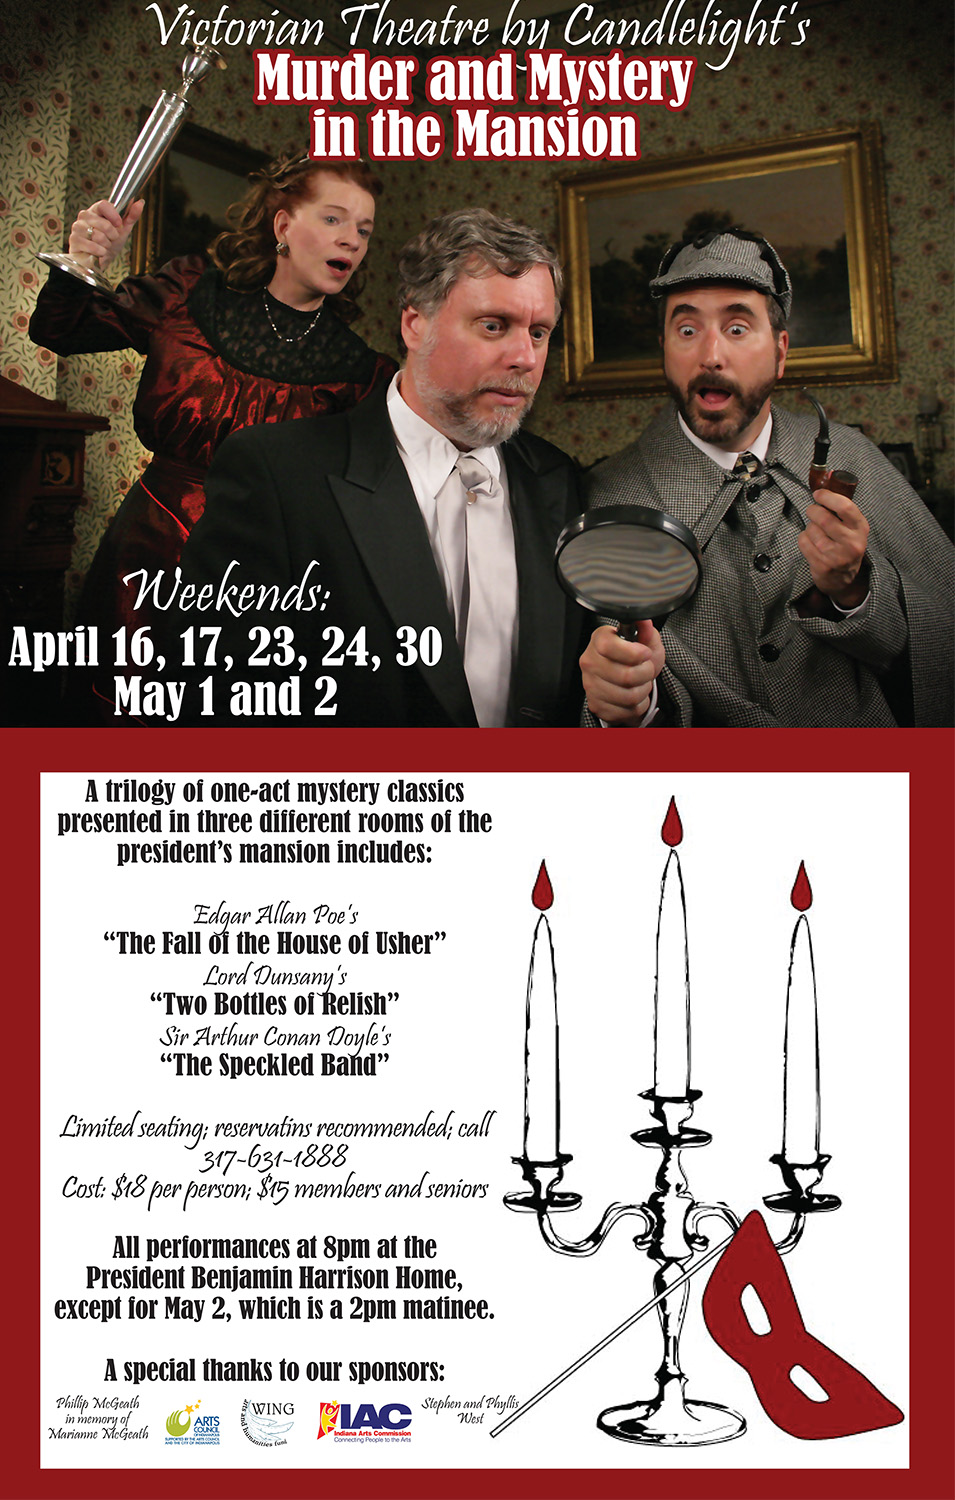 Photographic image of Sherlock Holmes and Dr. Watson looking through magnifying glass. A woman stands behind them. She has her arm raised and is holding a candlestick, as if to attack the pair. Text reads: victorian theatre by candlelight's murder and mystery in the mansion. weekends april 16, 17, 23, 24, 30, may 1 and 2. a trilogy of one act mystery classics presented in three different rooms: edgar allen poe's the fall of the house of usher, lord dusany's the speckled band. limited seating. reservations recommended. call 317 631 1888. cost is $18 per person, $15 for members and seniors. All performances at 8 p.m. at the president benjamin harrison home, except for may 2, which is a 2 p.m. matinee.